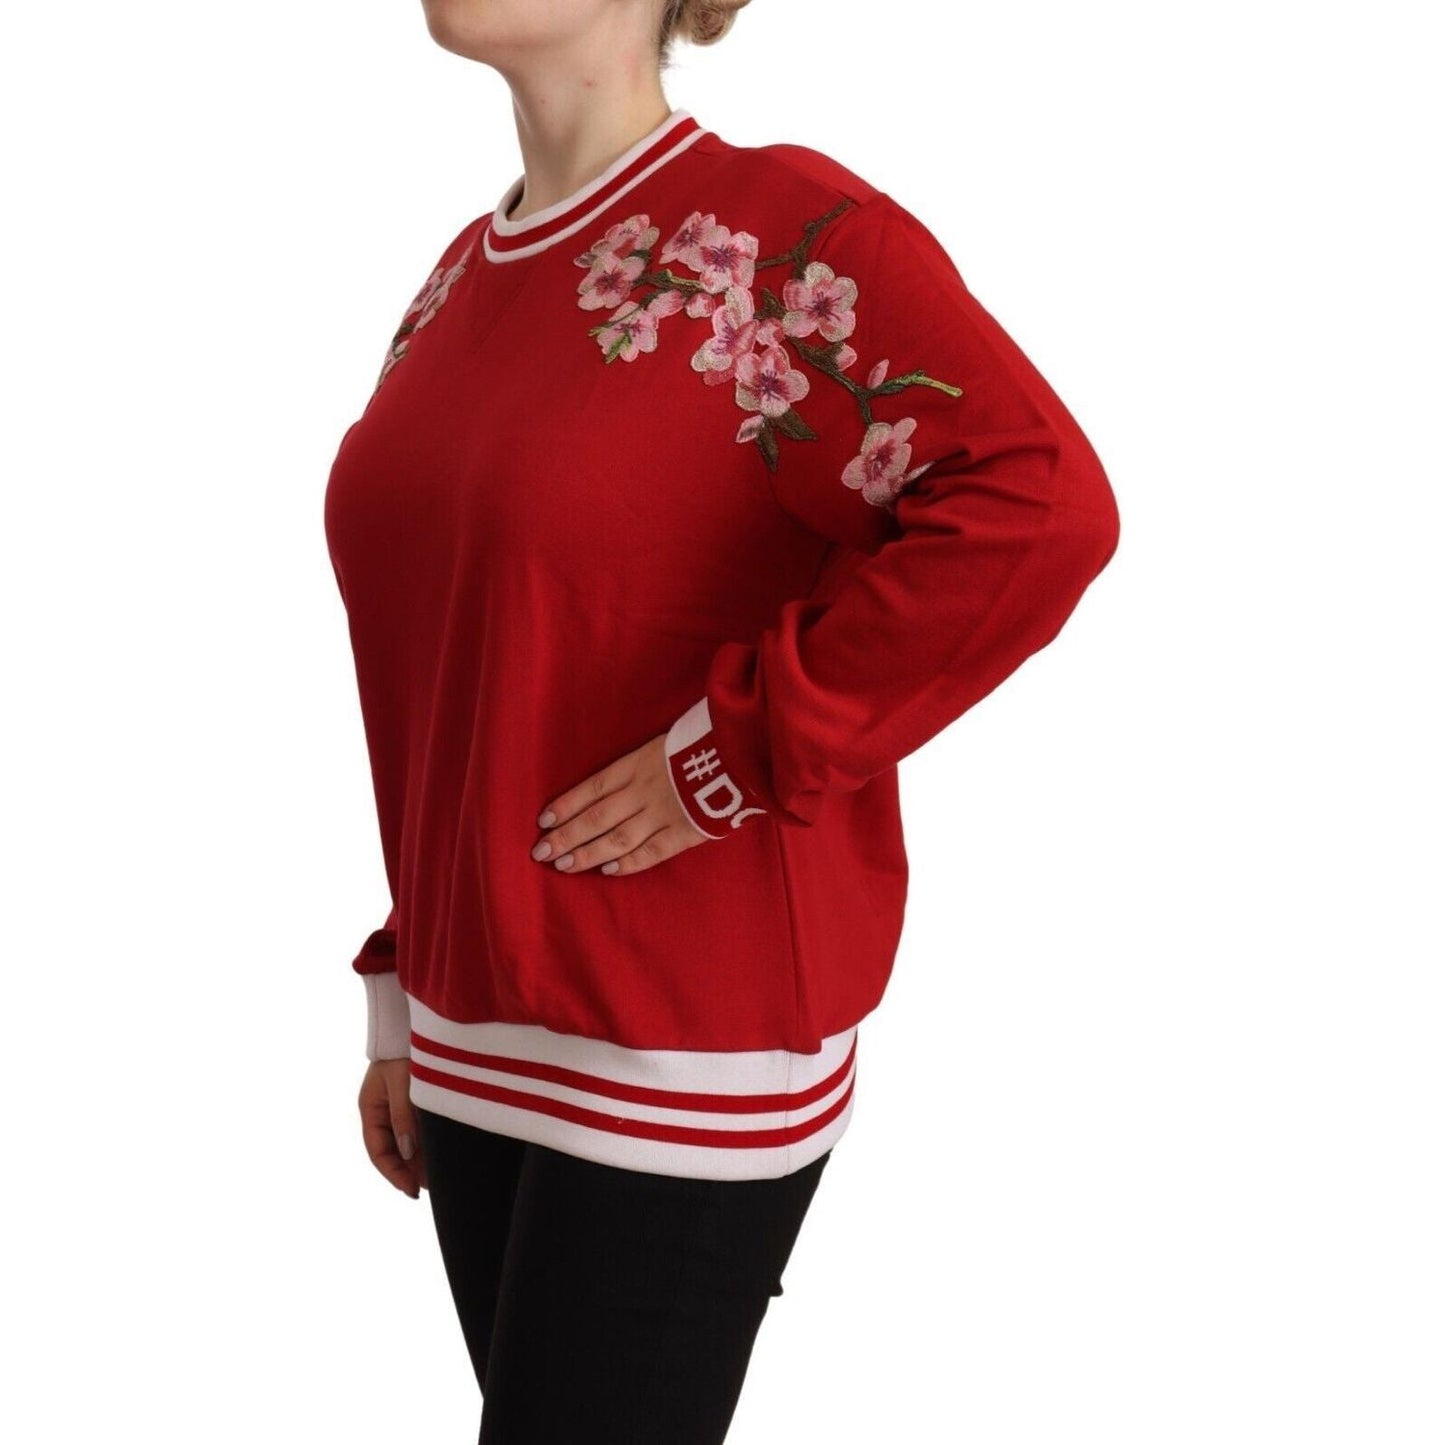 Dolce & Gabbana Elegant Red Crewneck Pullover with Floral Motif red-cotton-crewneck-dglove-pullover-sweater WOMAN SWEATERS s-l1600-1-17-7eaf24c0-e73.jpg